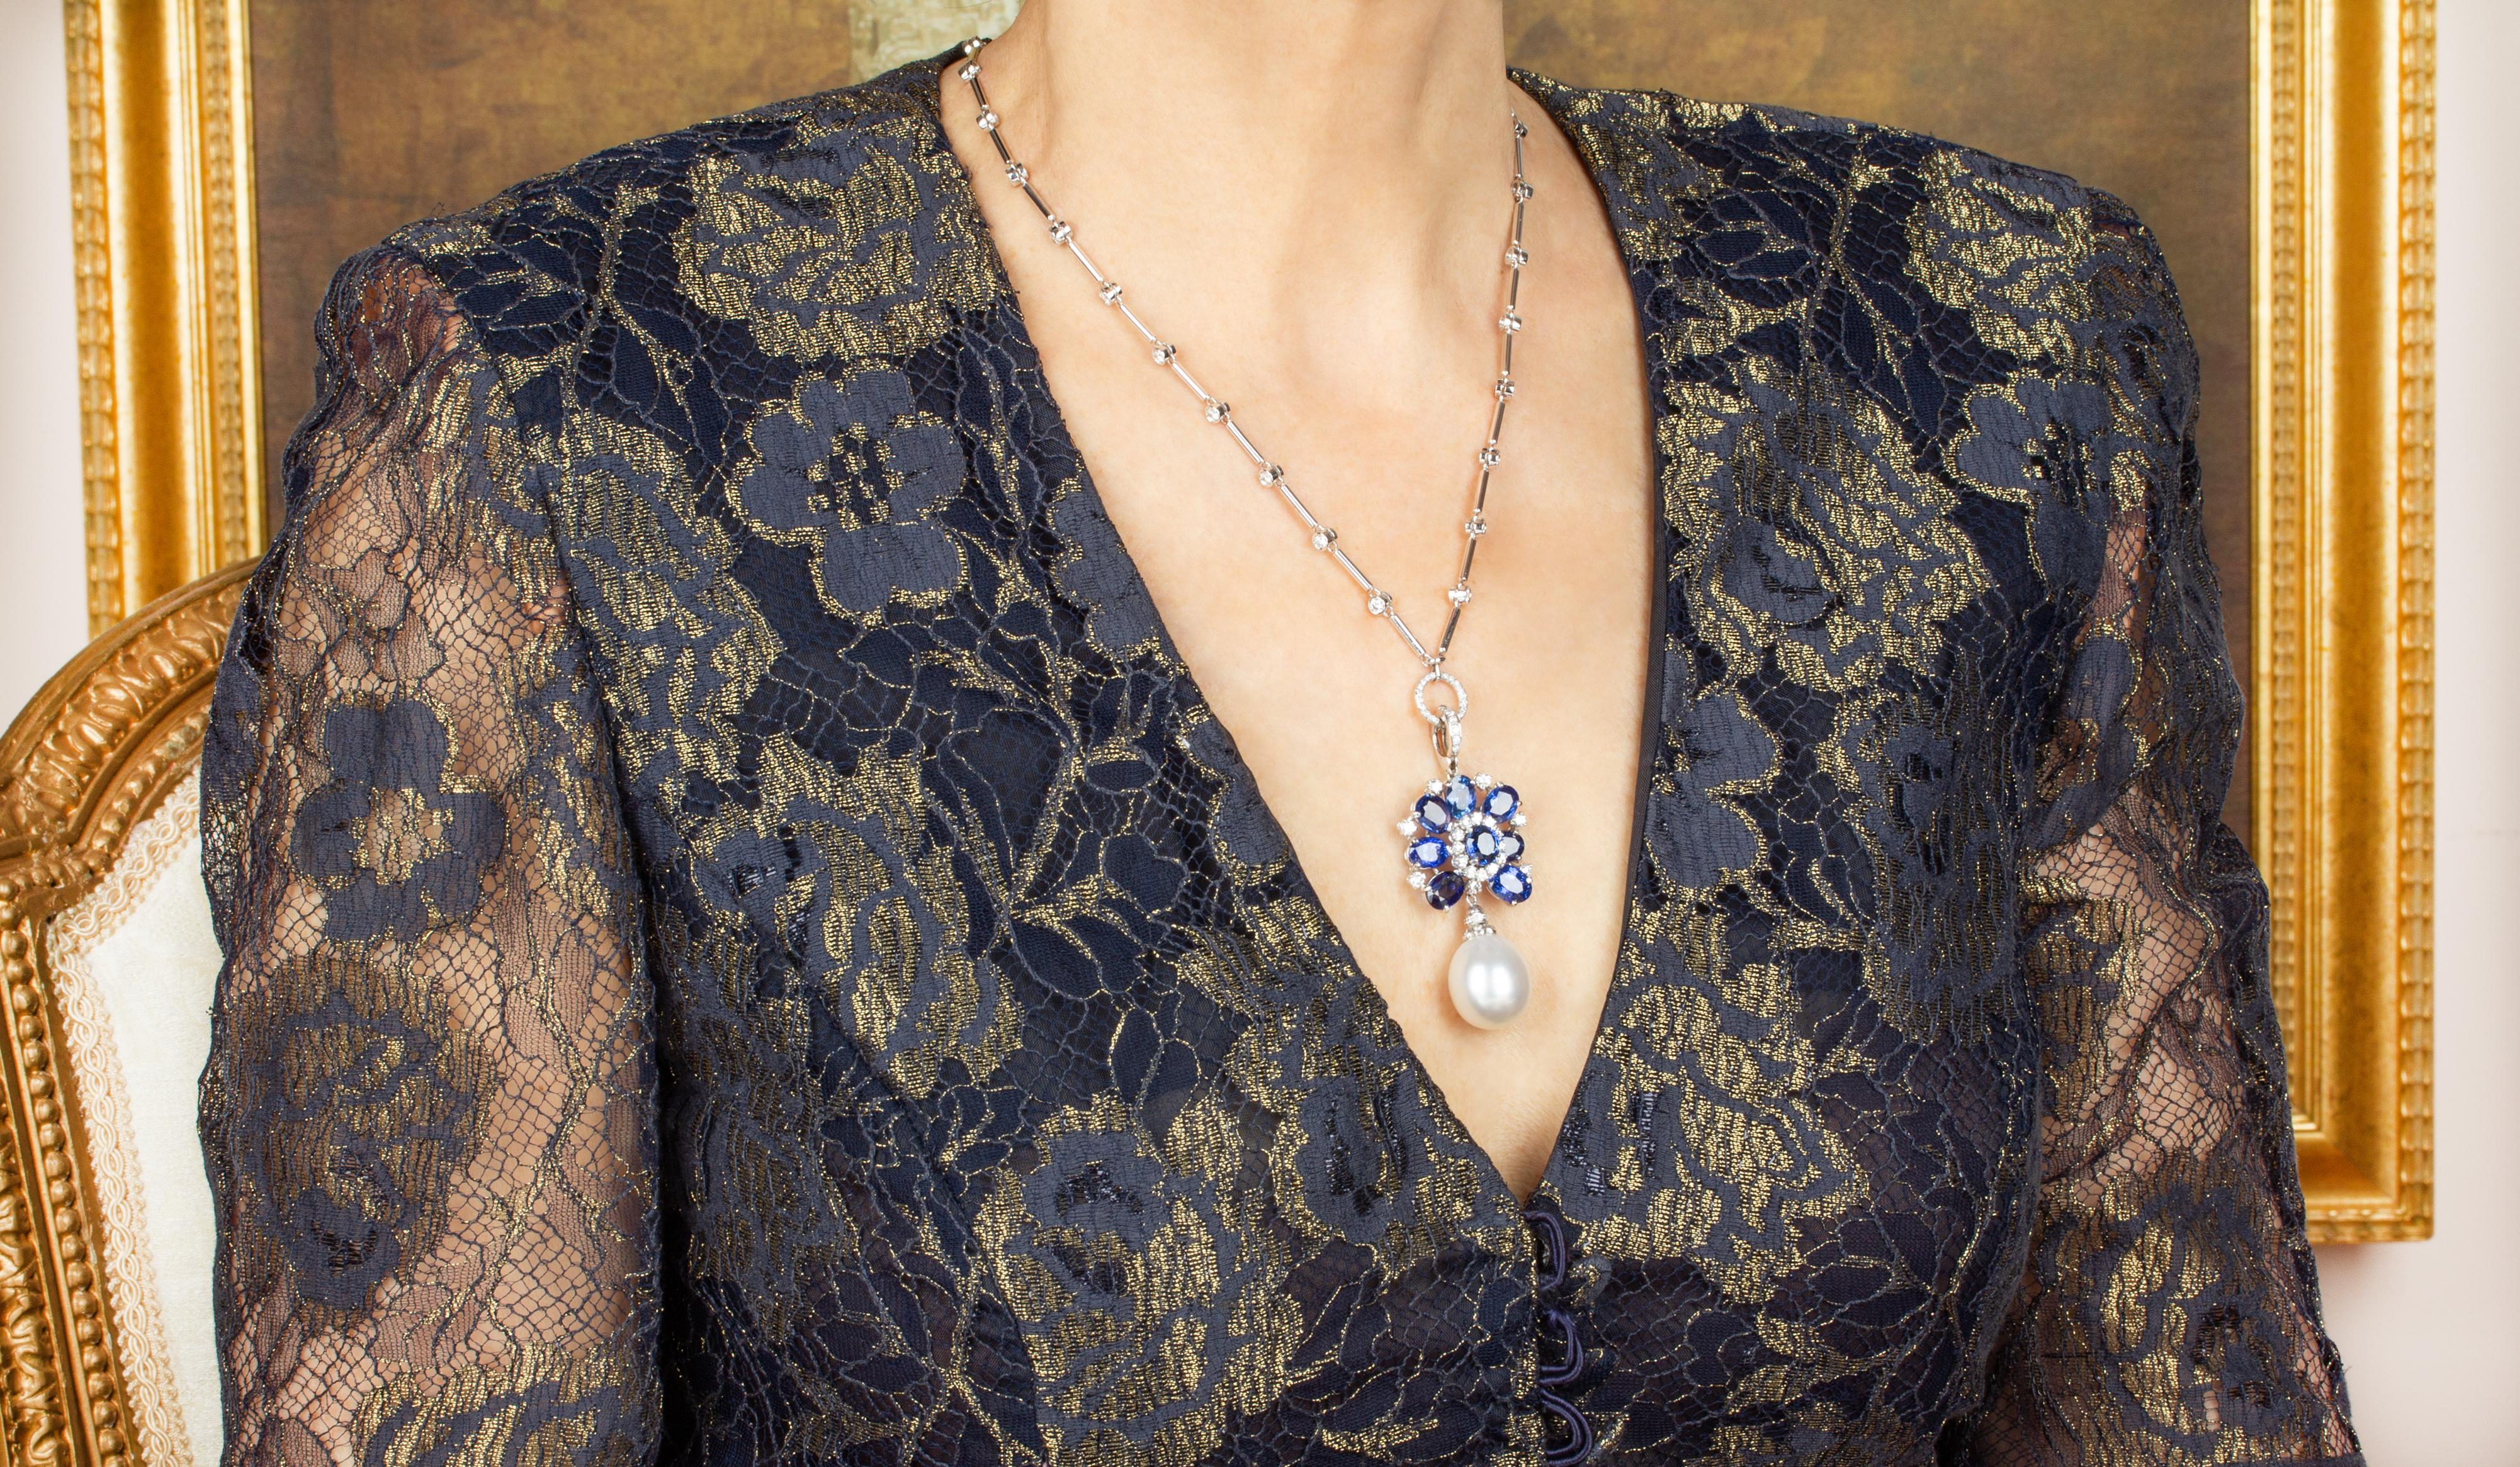 The blue sapphire and diamond pendant features an arrangement of oval shape faceted sapphires accented with a crown of round diamonds. The jewel suspends a splendid South Sea pearl of the unusual size of 18mm. The 2.25” pendant is accompanied by an